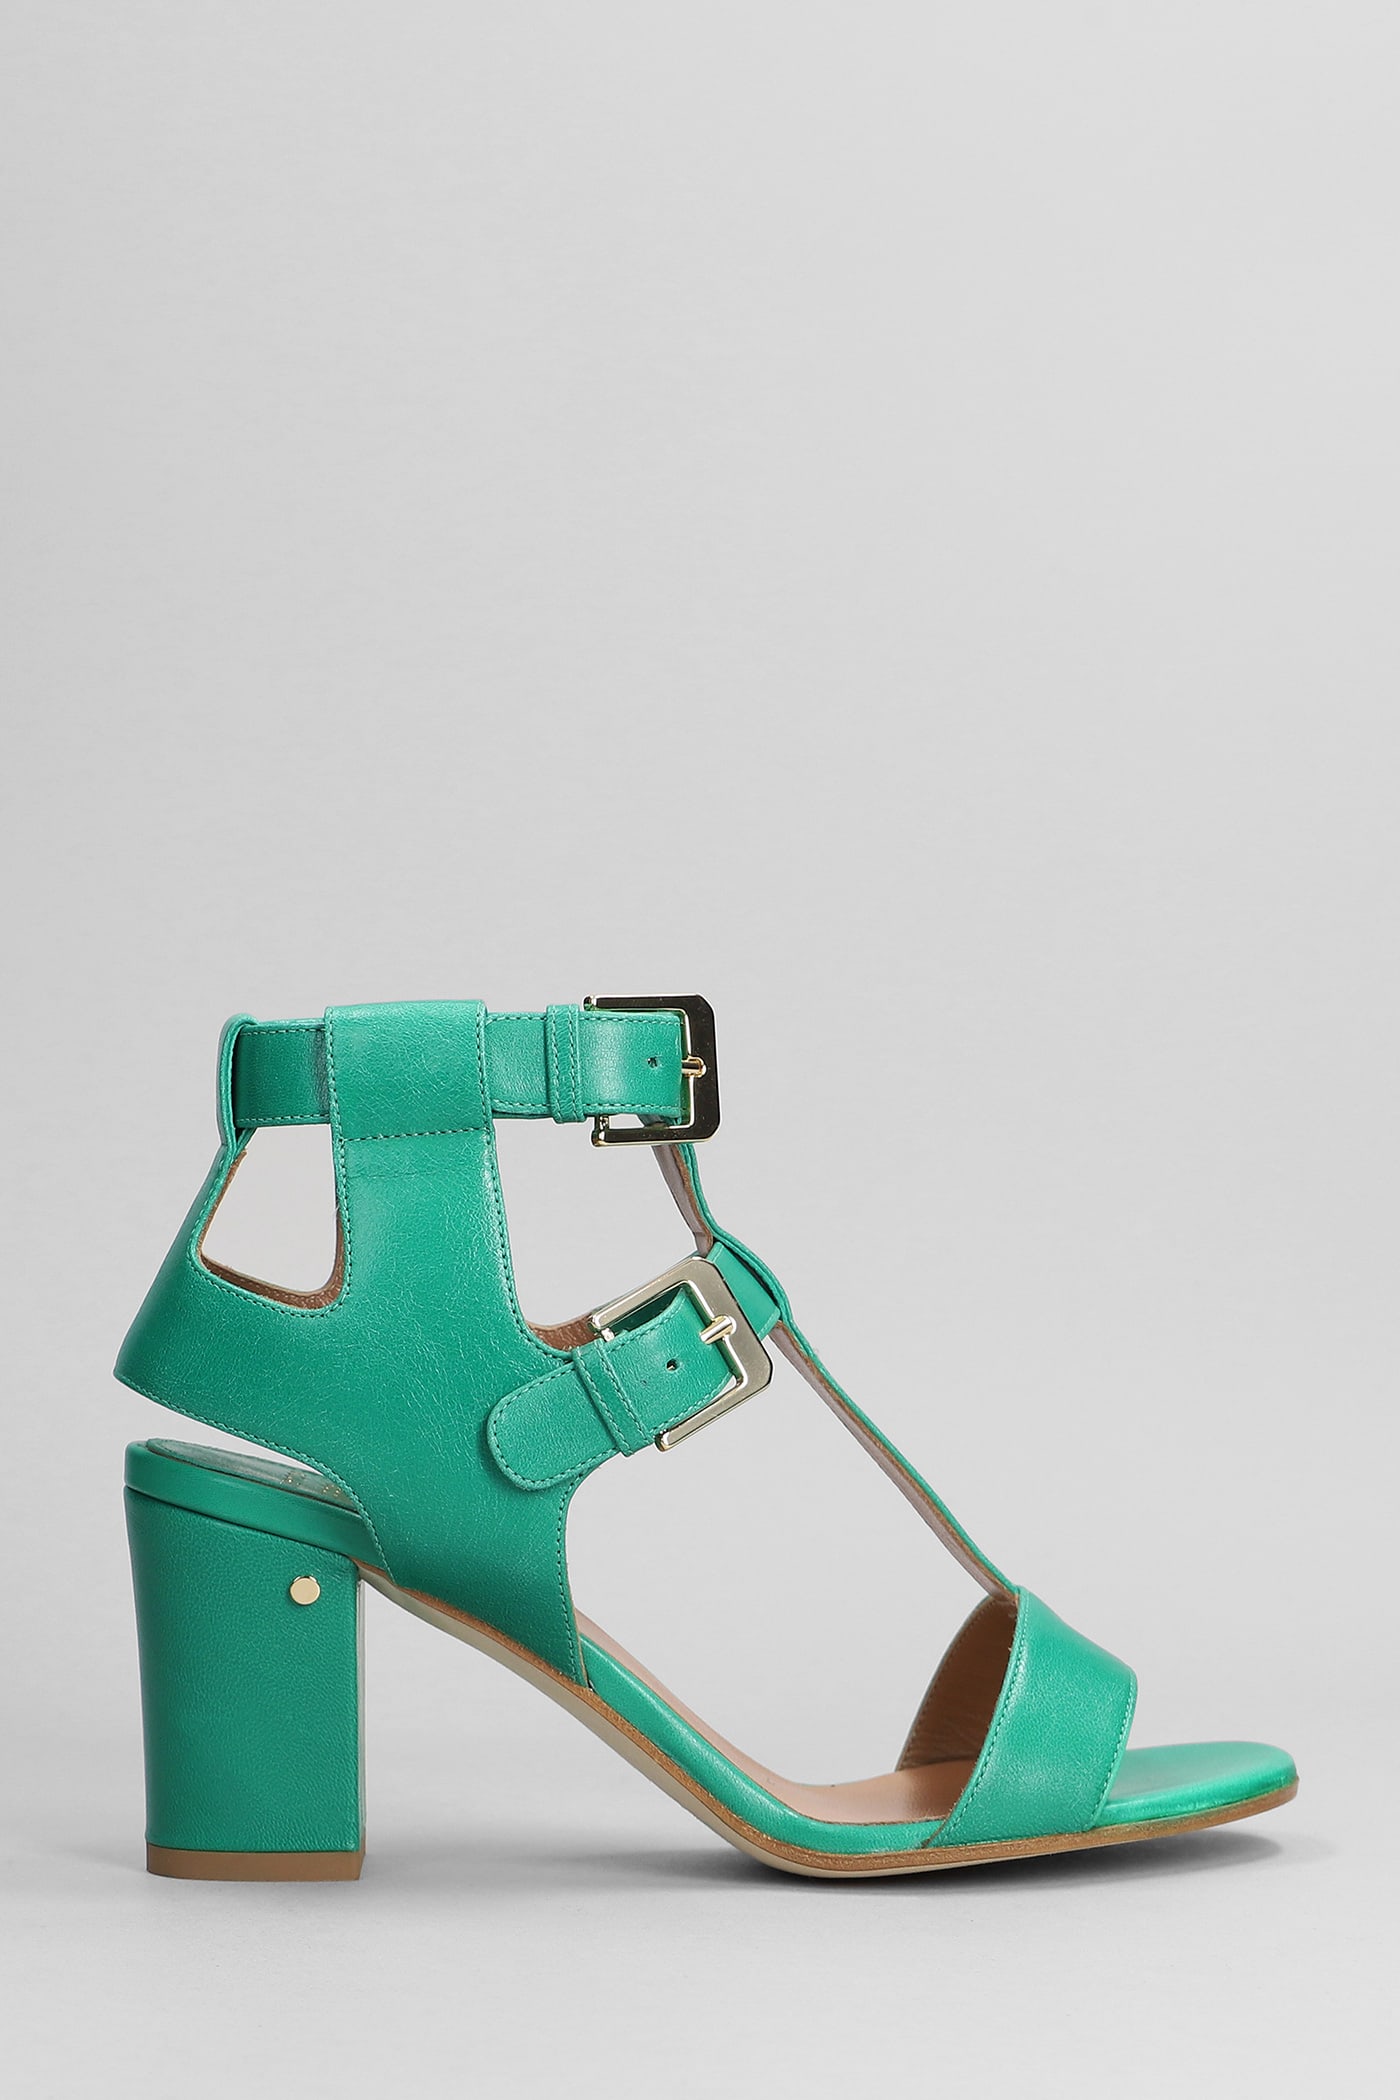 Laurence Dacade Helie Sandals In Green Leather